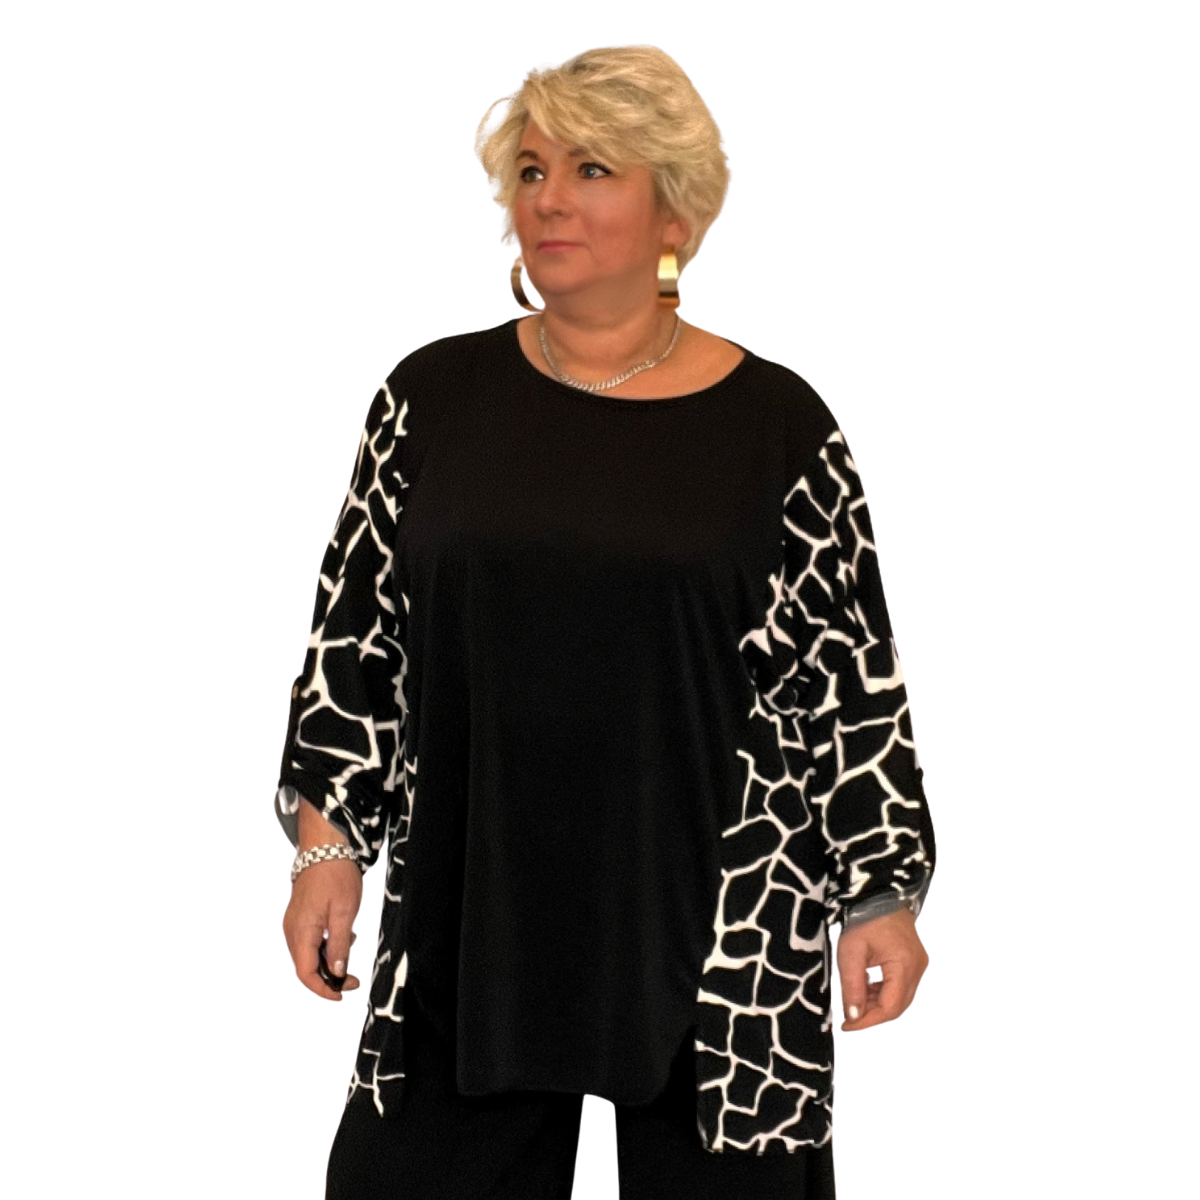 LONG LENGTH TOP WITH ANIMAL PRINT PANELS + SLEEVES